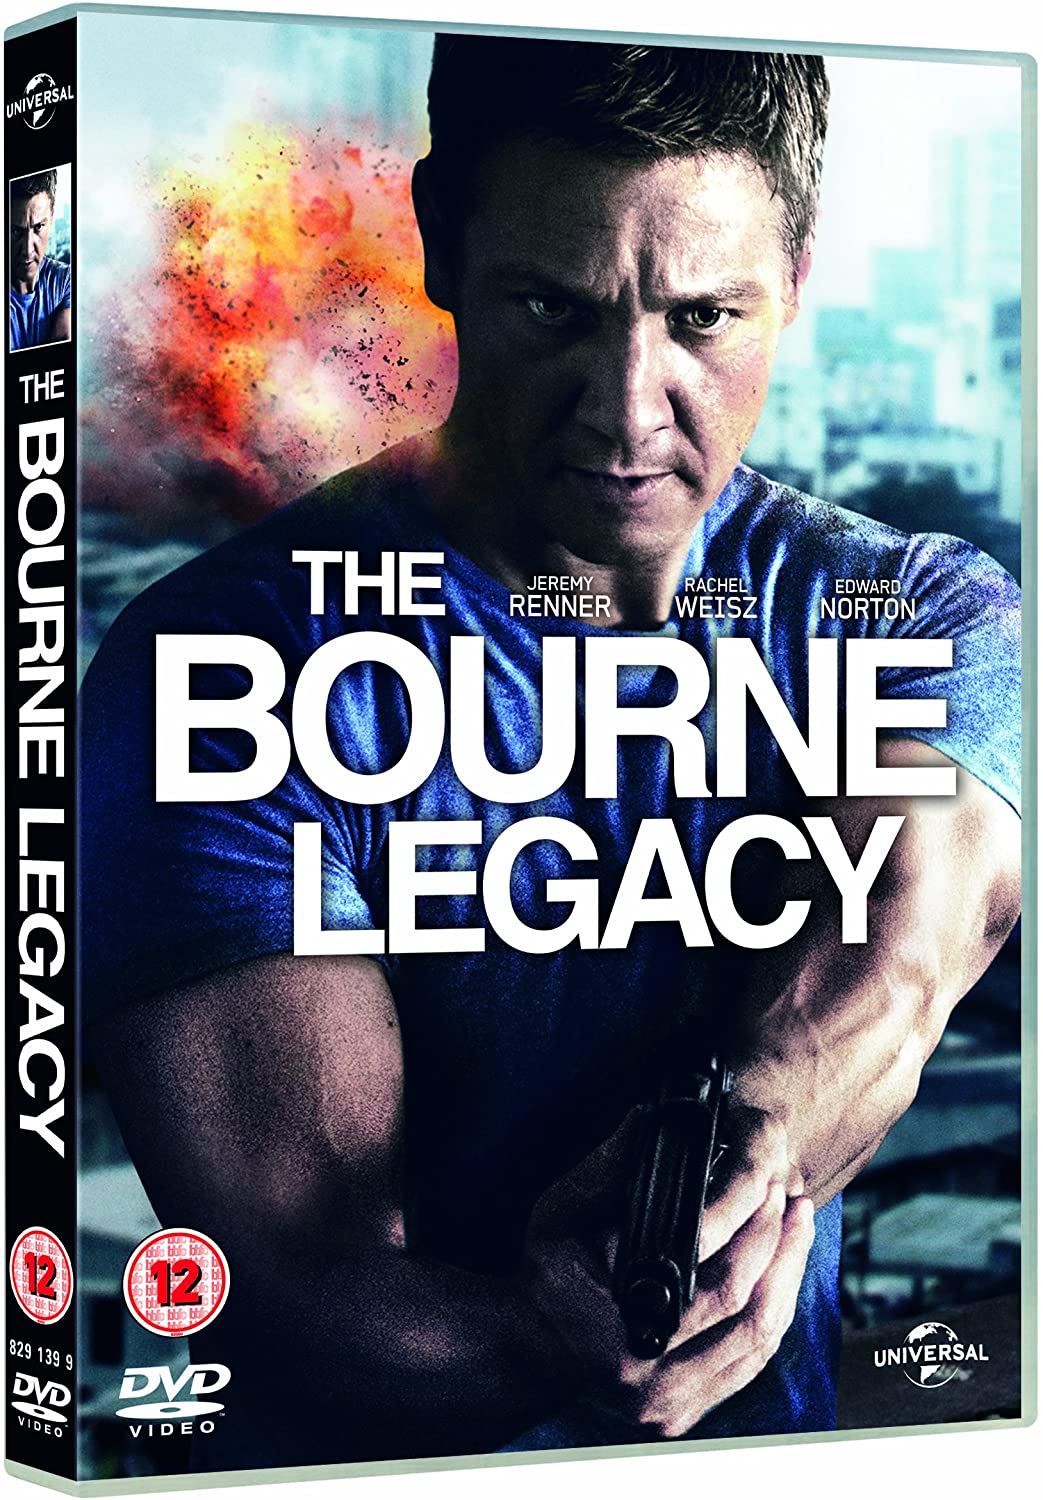 The Bourne Legacy - Action/Thriller [DVD]